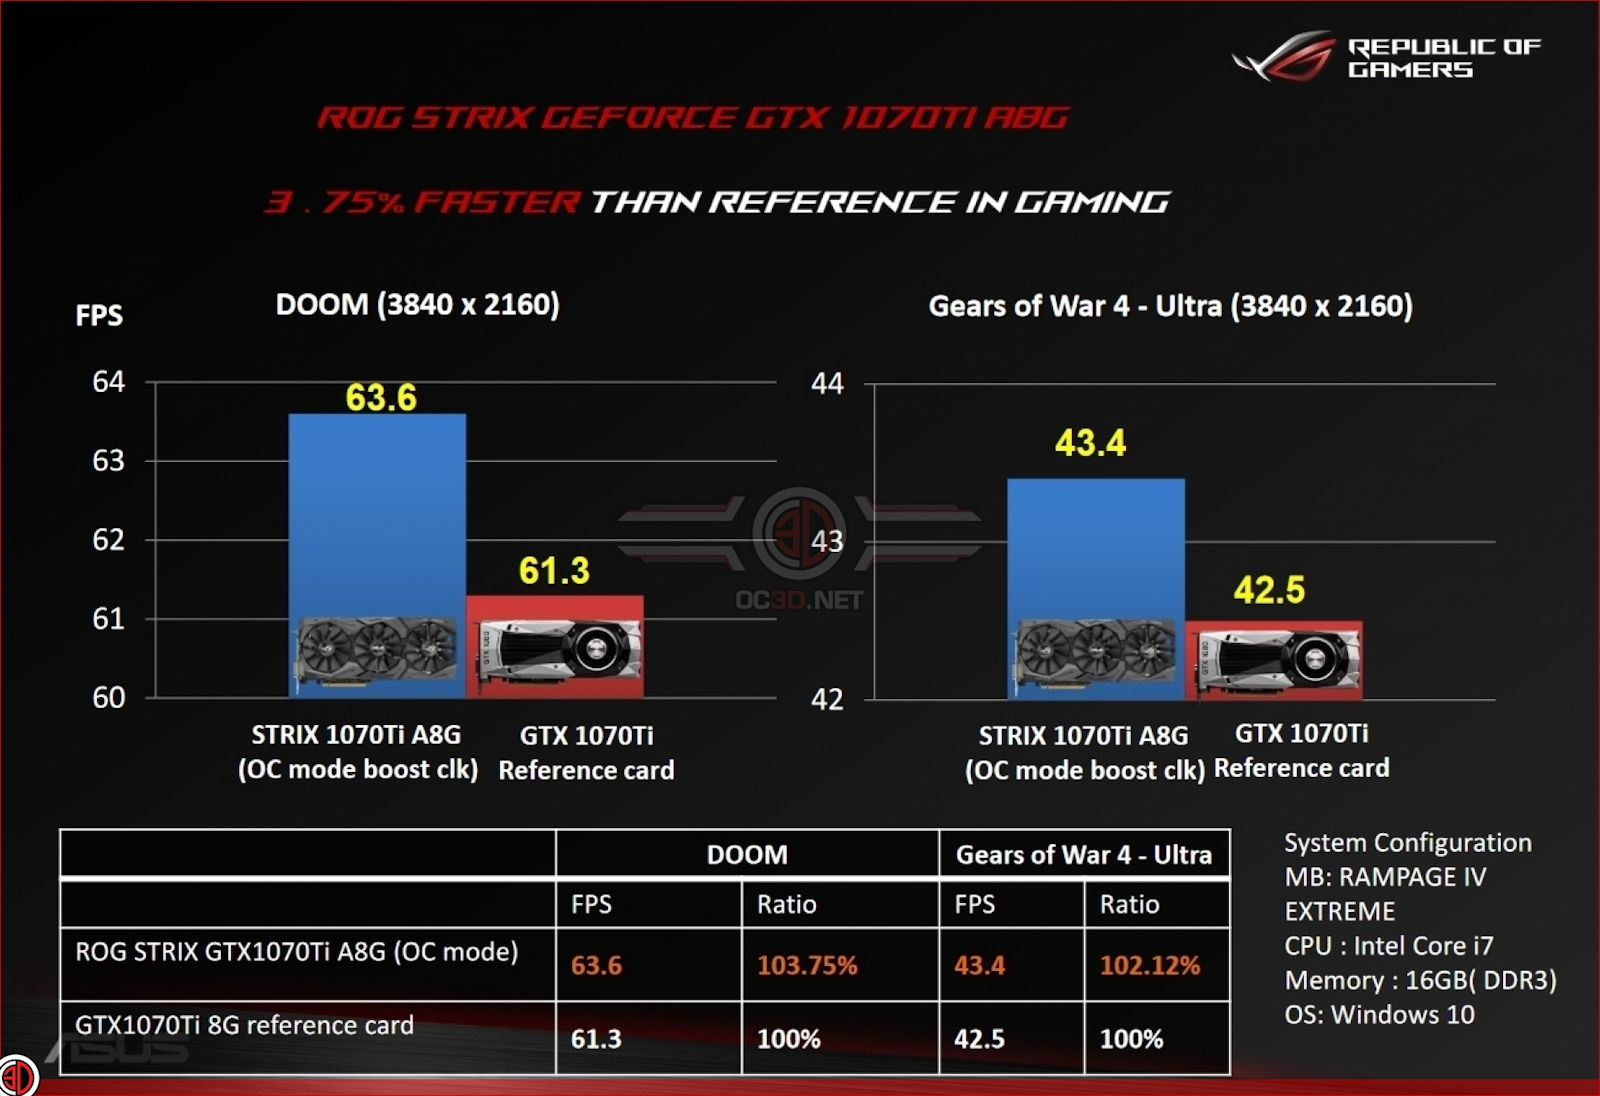 Media asset in full size related to 3dfxzone.it news item entitled as follows: Benchmarks: ASUS ROG STRIX GTX 1070 Ti Advanced vs Founders Edition | Image Name: news27287_ASUS-ROG-STRIX-GTX-1070-Ti-Advanced_3.jpg